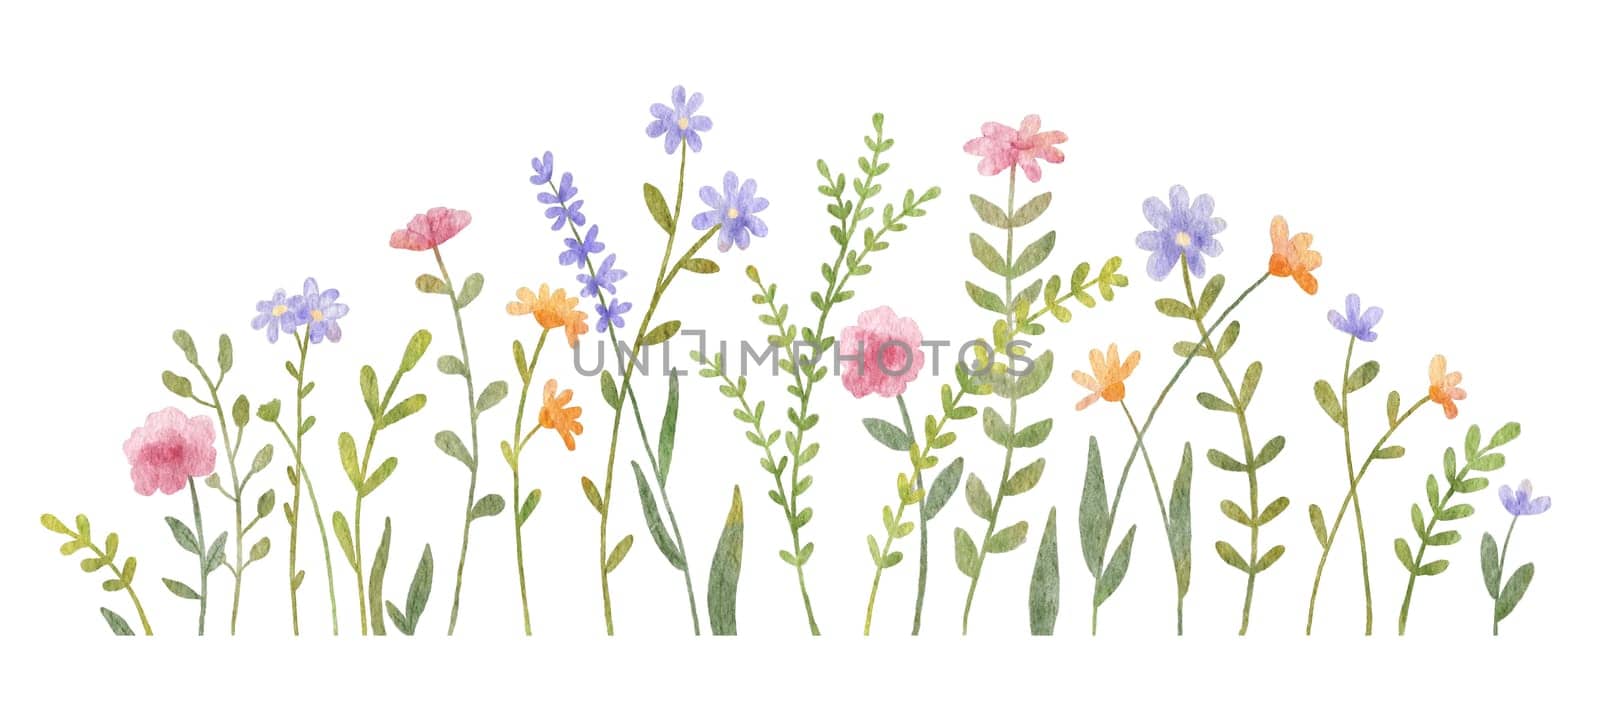 Watercolor wild herbs and flowers illustration. Hand painted meadow with grass and wildflowers isolated on white background. Floral border